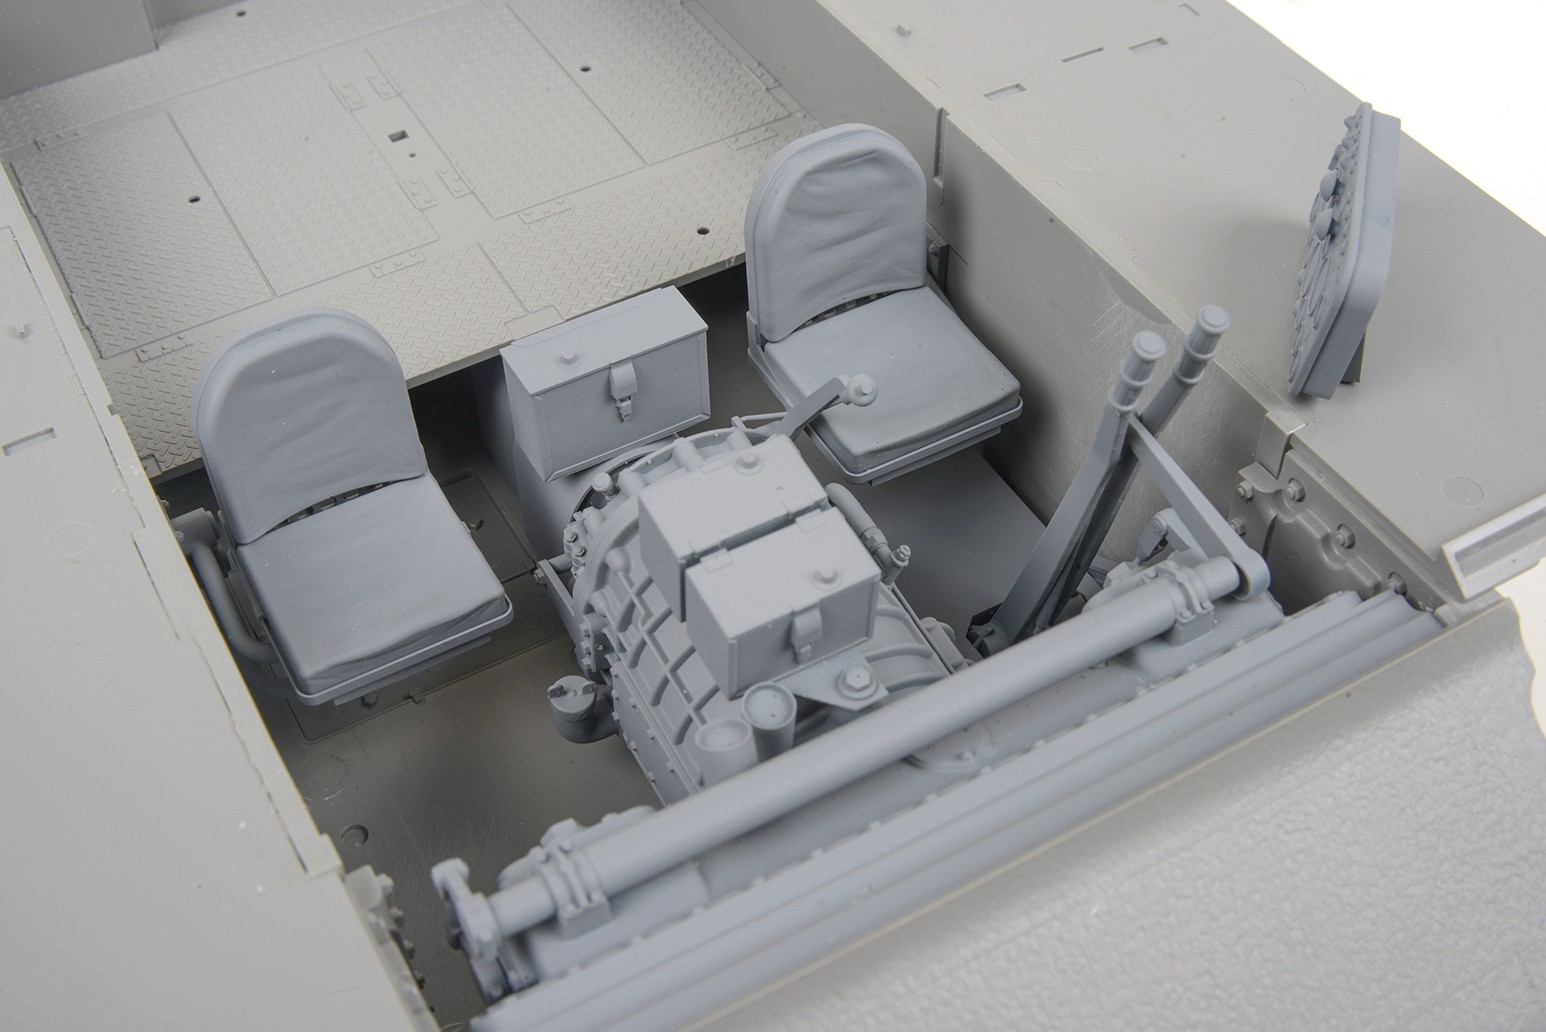 16153 1:16 M10 Achilles Driver’s Compartment for AHHQ kits